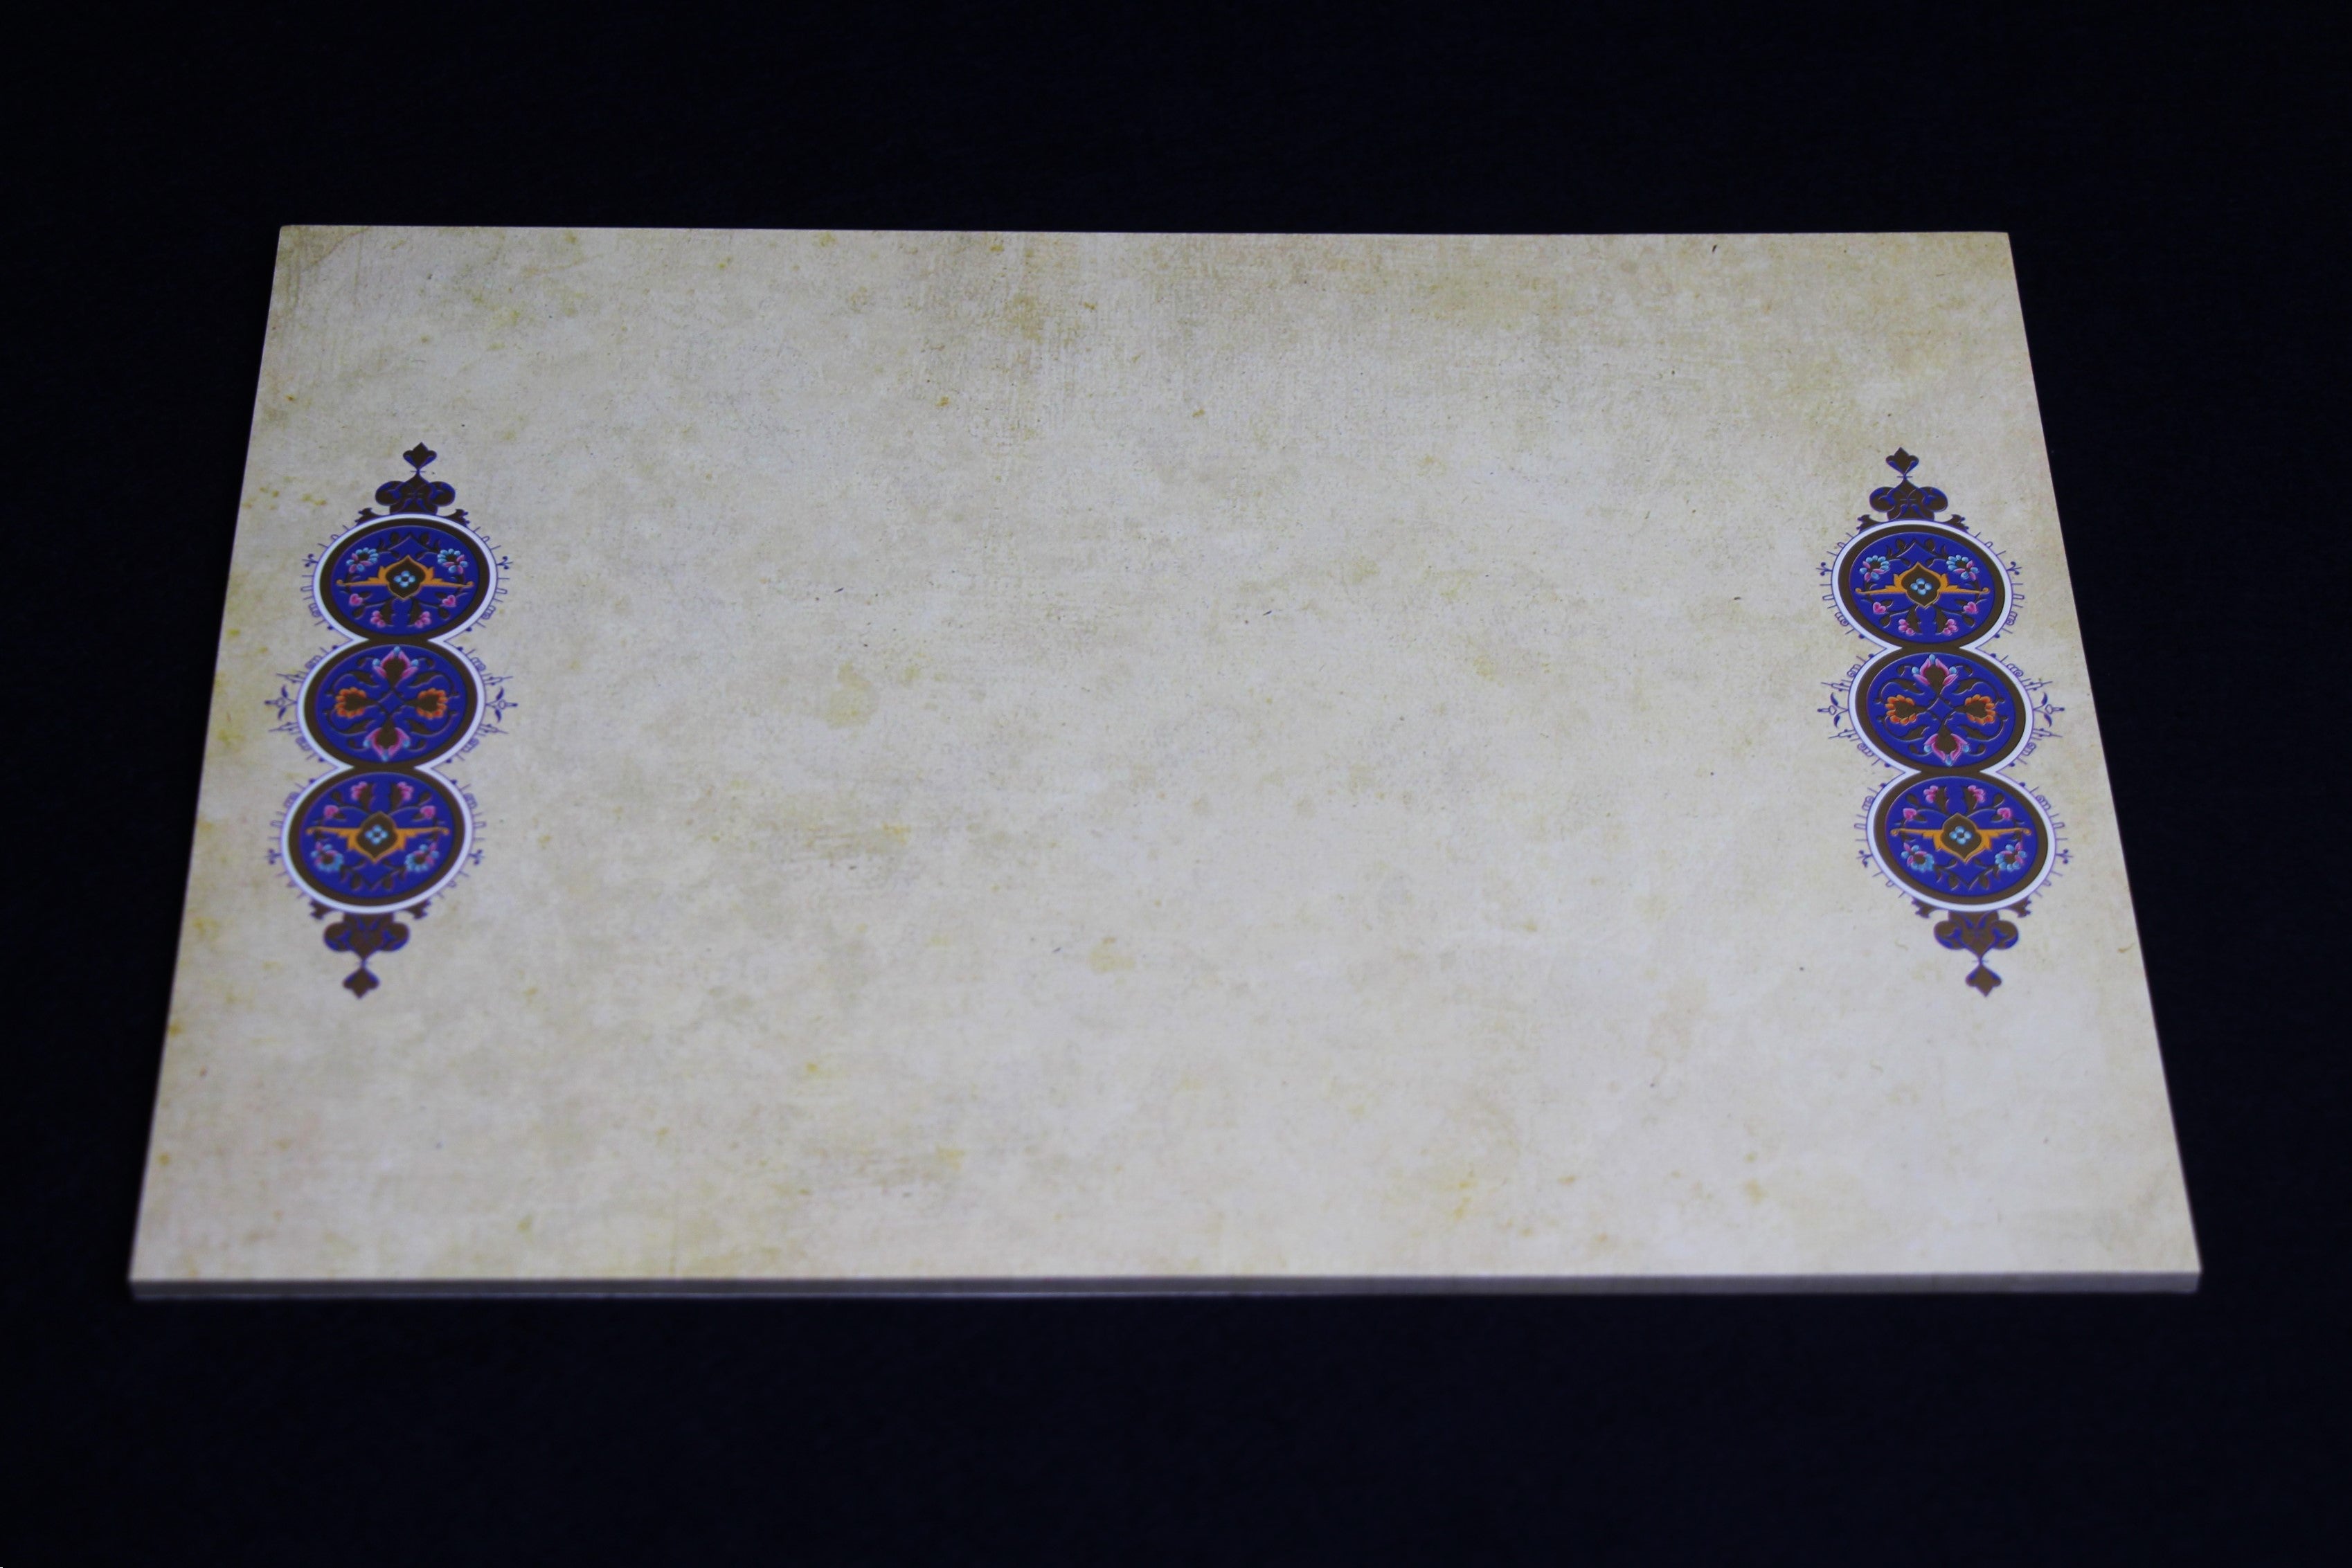 Book of 25 leaves of semi-gloss paper for Arabic calligraphy with decorated border (c)